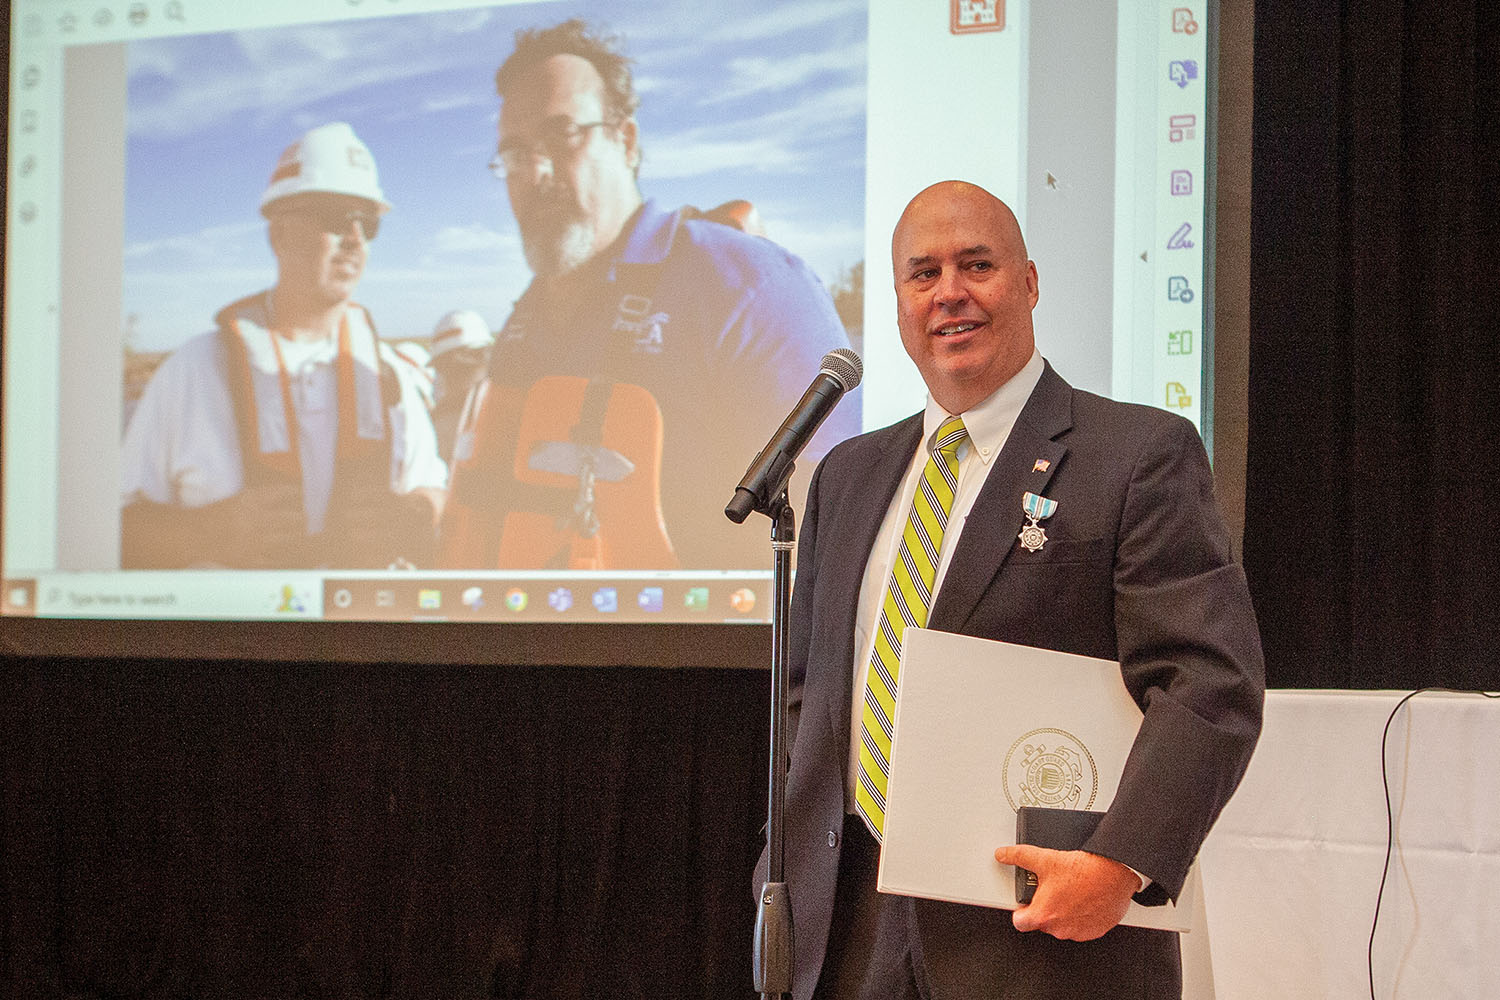 Vic Landry, operations manager of the GIWW, speaks to the GICA crowd after receiving the Coast Guard Meritorious Public Service Award. Landry and Paul Dittman, GICA president, are pictured together on the screen during Hurricane Ida recovery operations. (Photo by Frank McCormack)